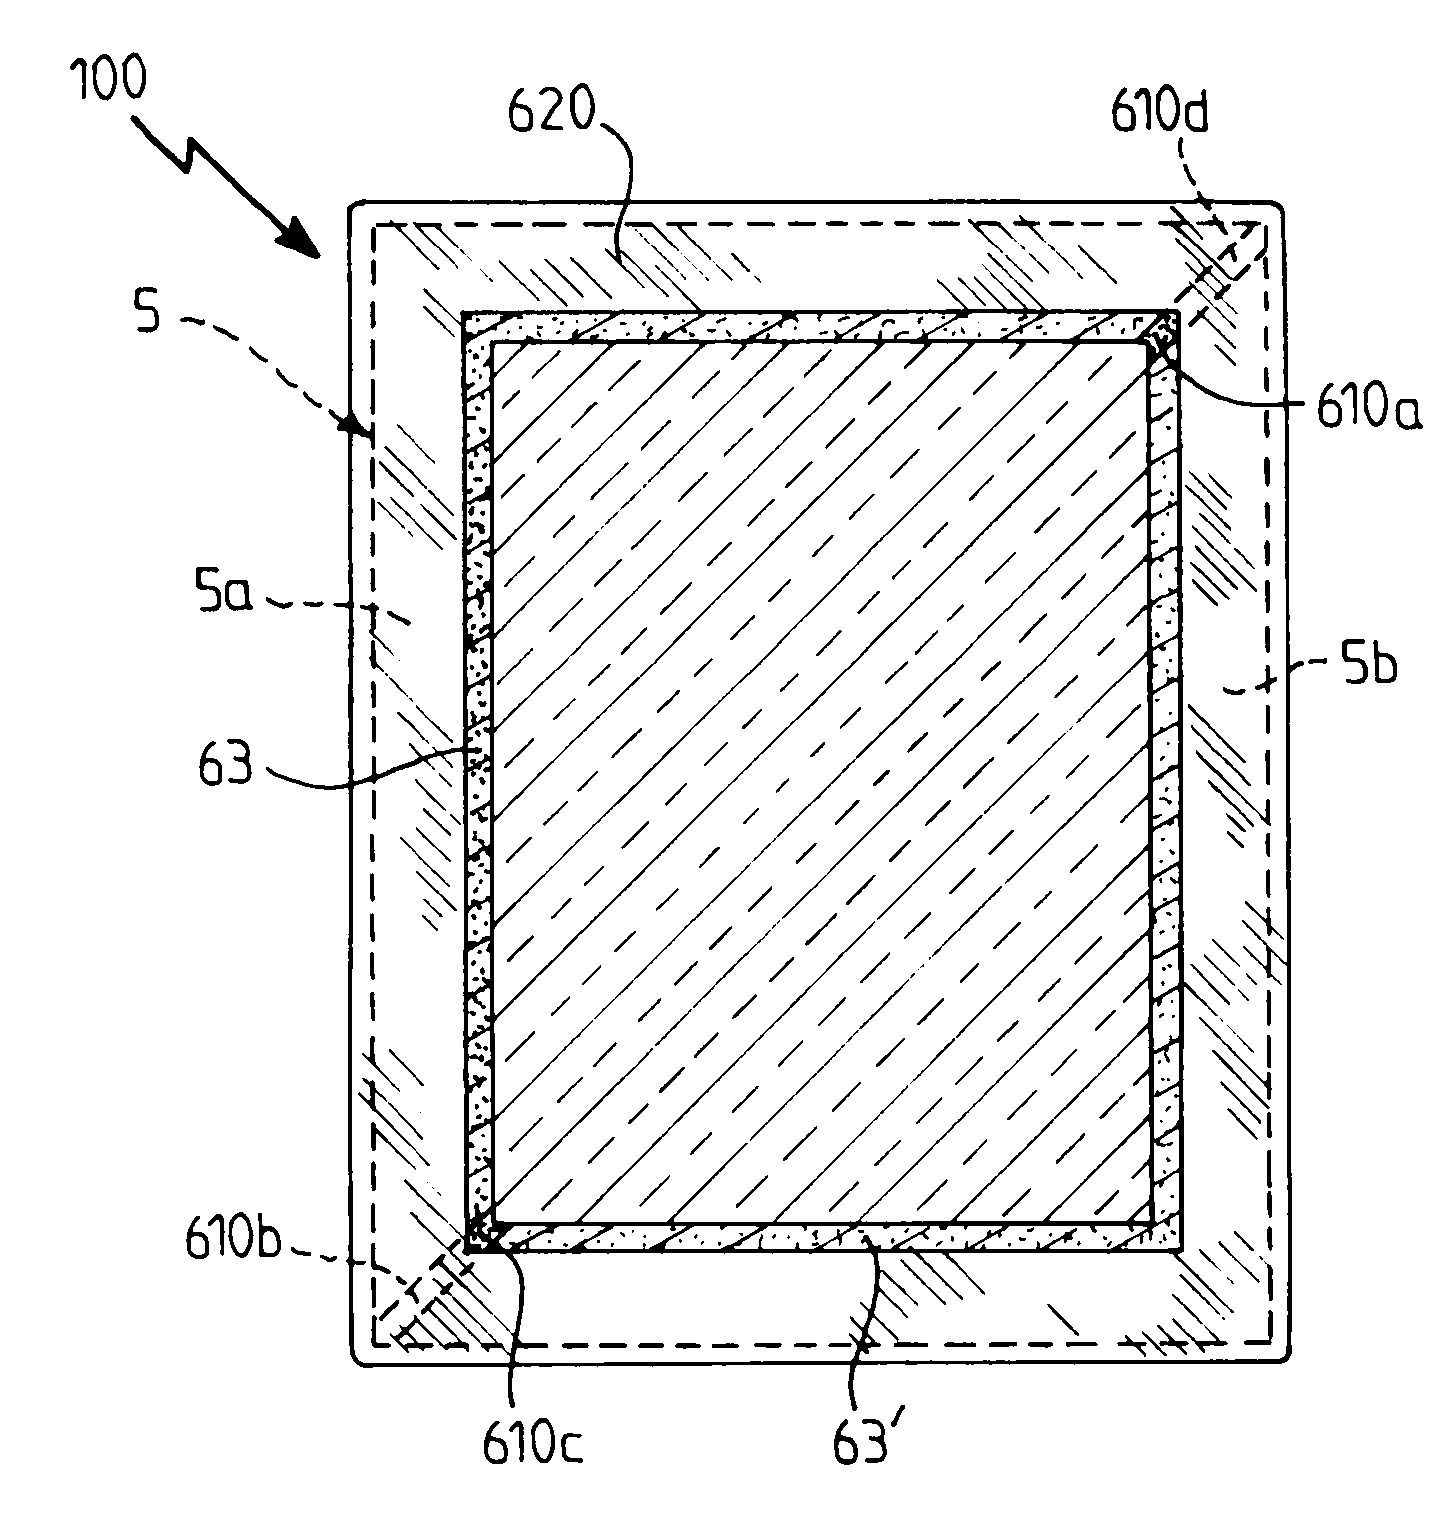 Active device having variable energy/optical properties